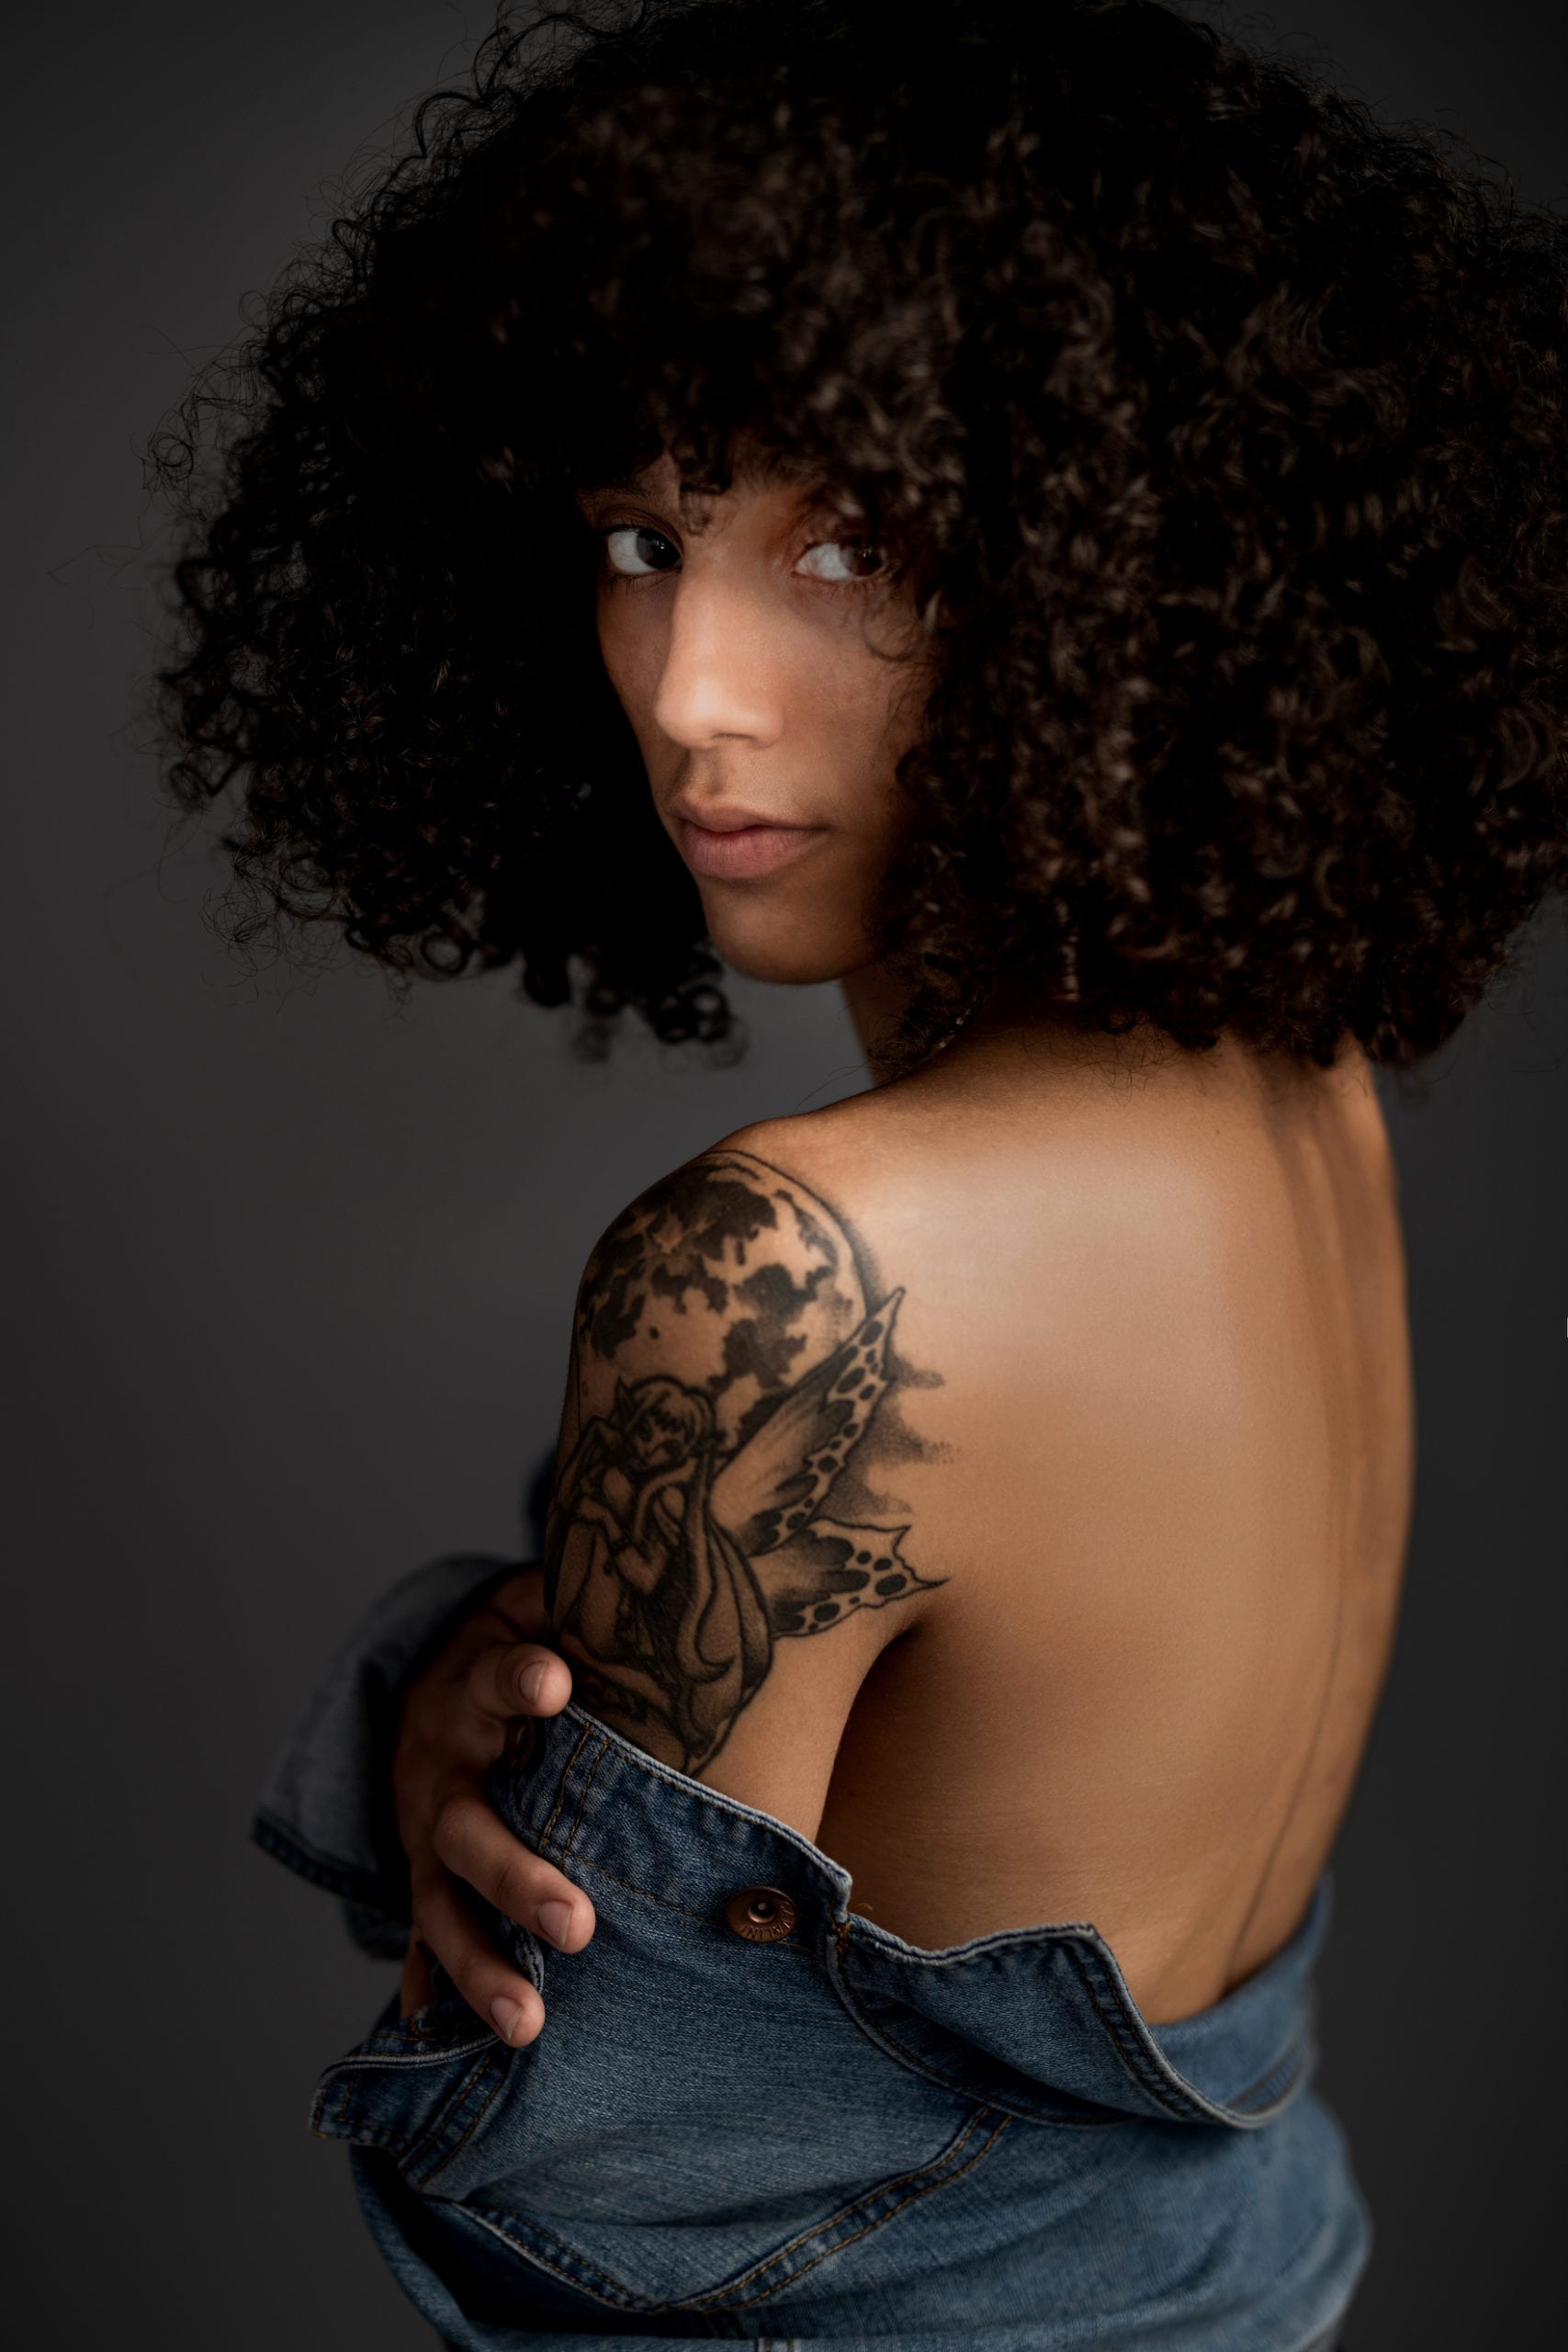 South Florida Model Jasmine with black poofy hair looking over her tattooed shoulder into the camera